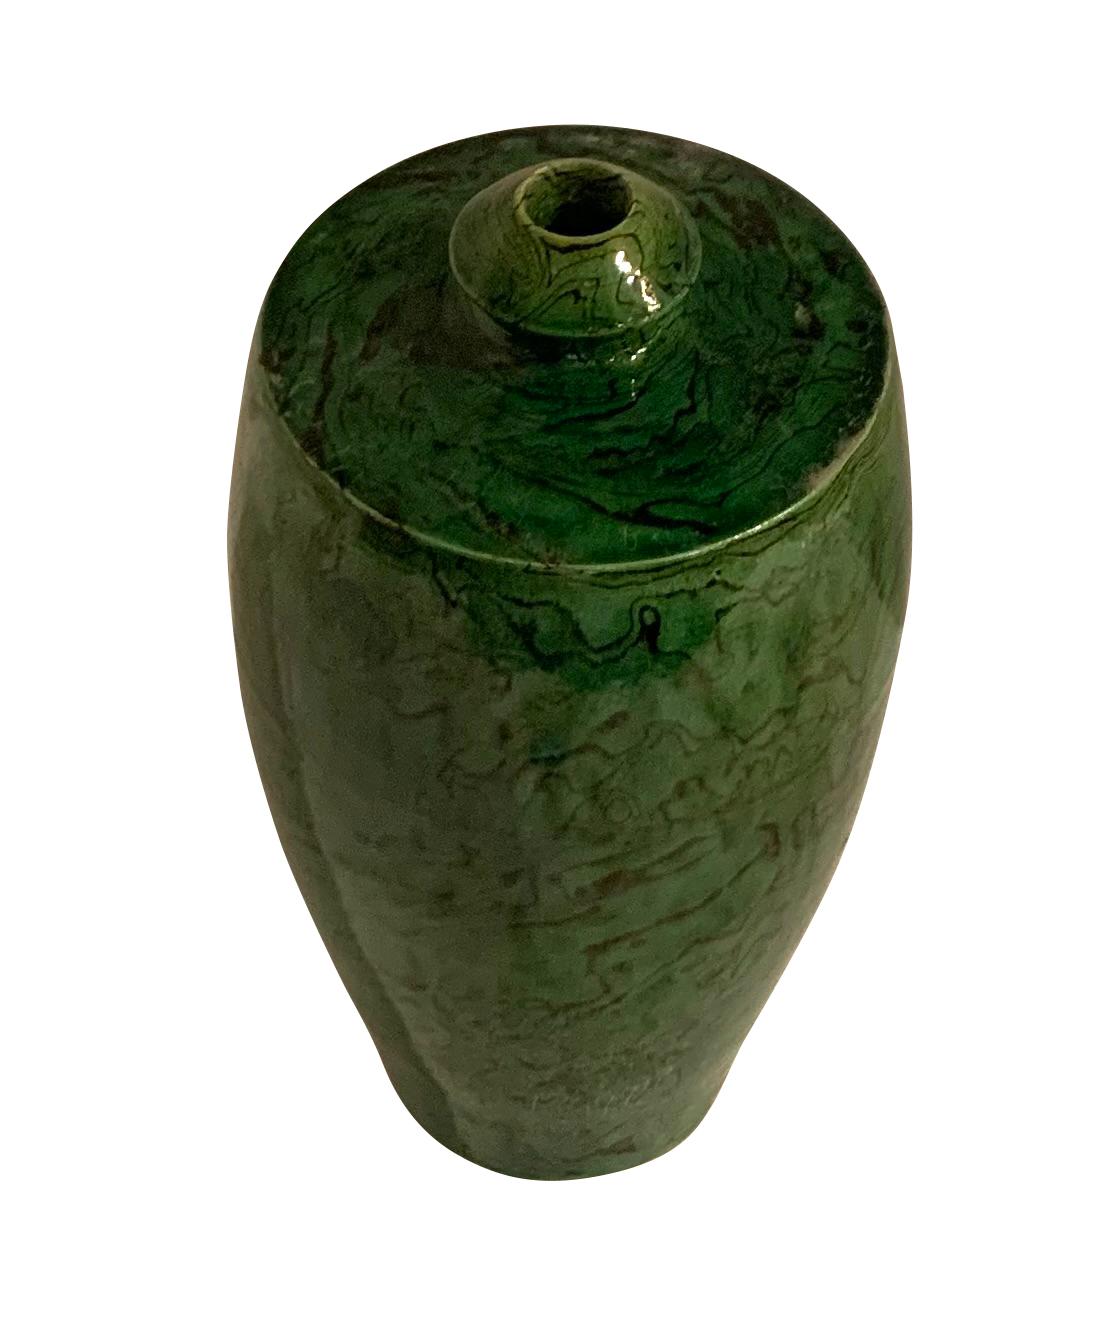 Contemporary Chinese malachite patterned vase.
Small spout opening.
Two available.